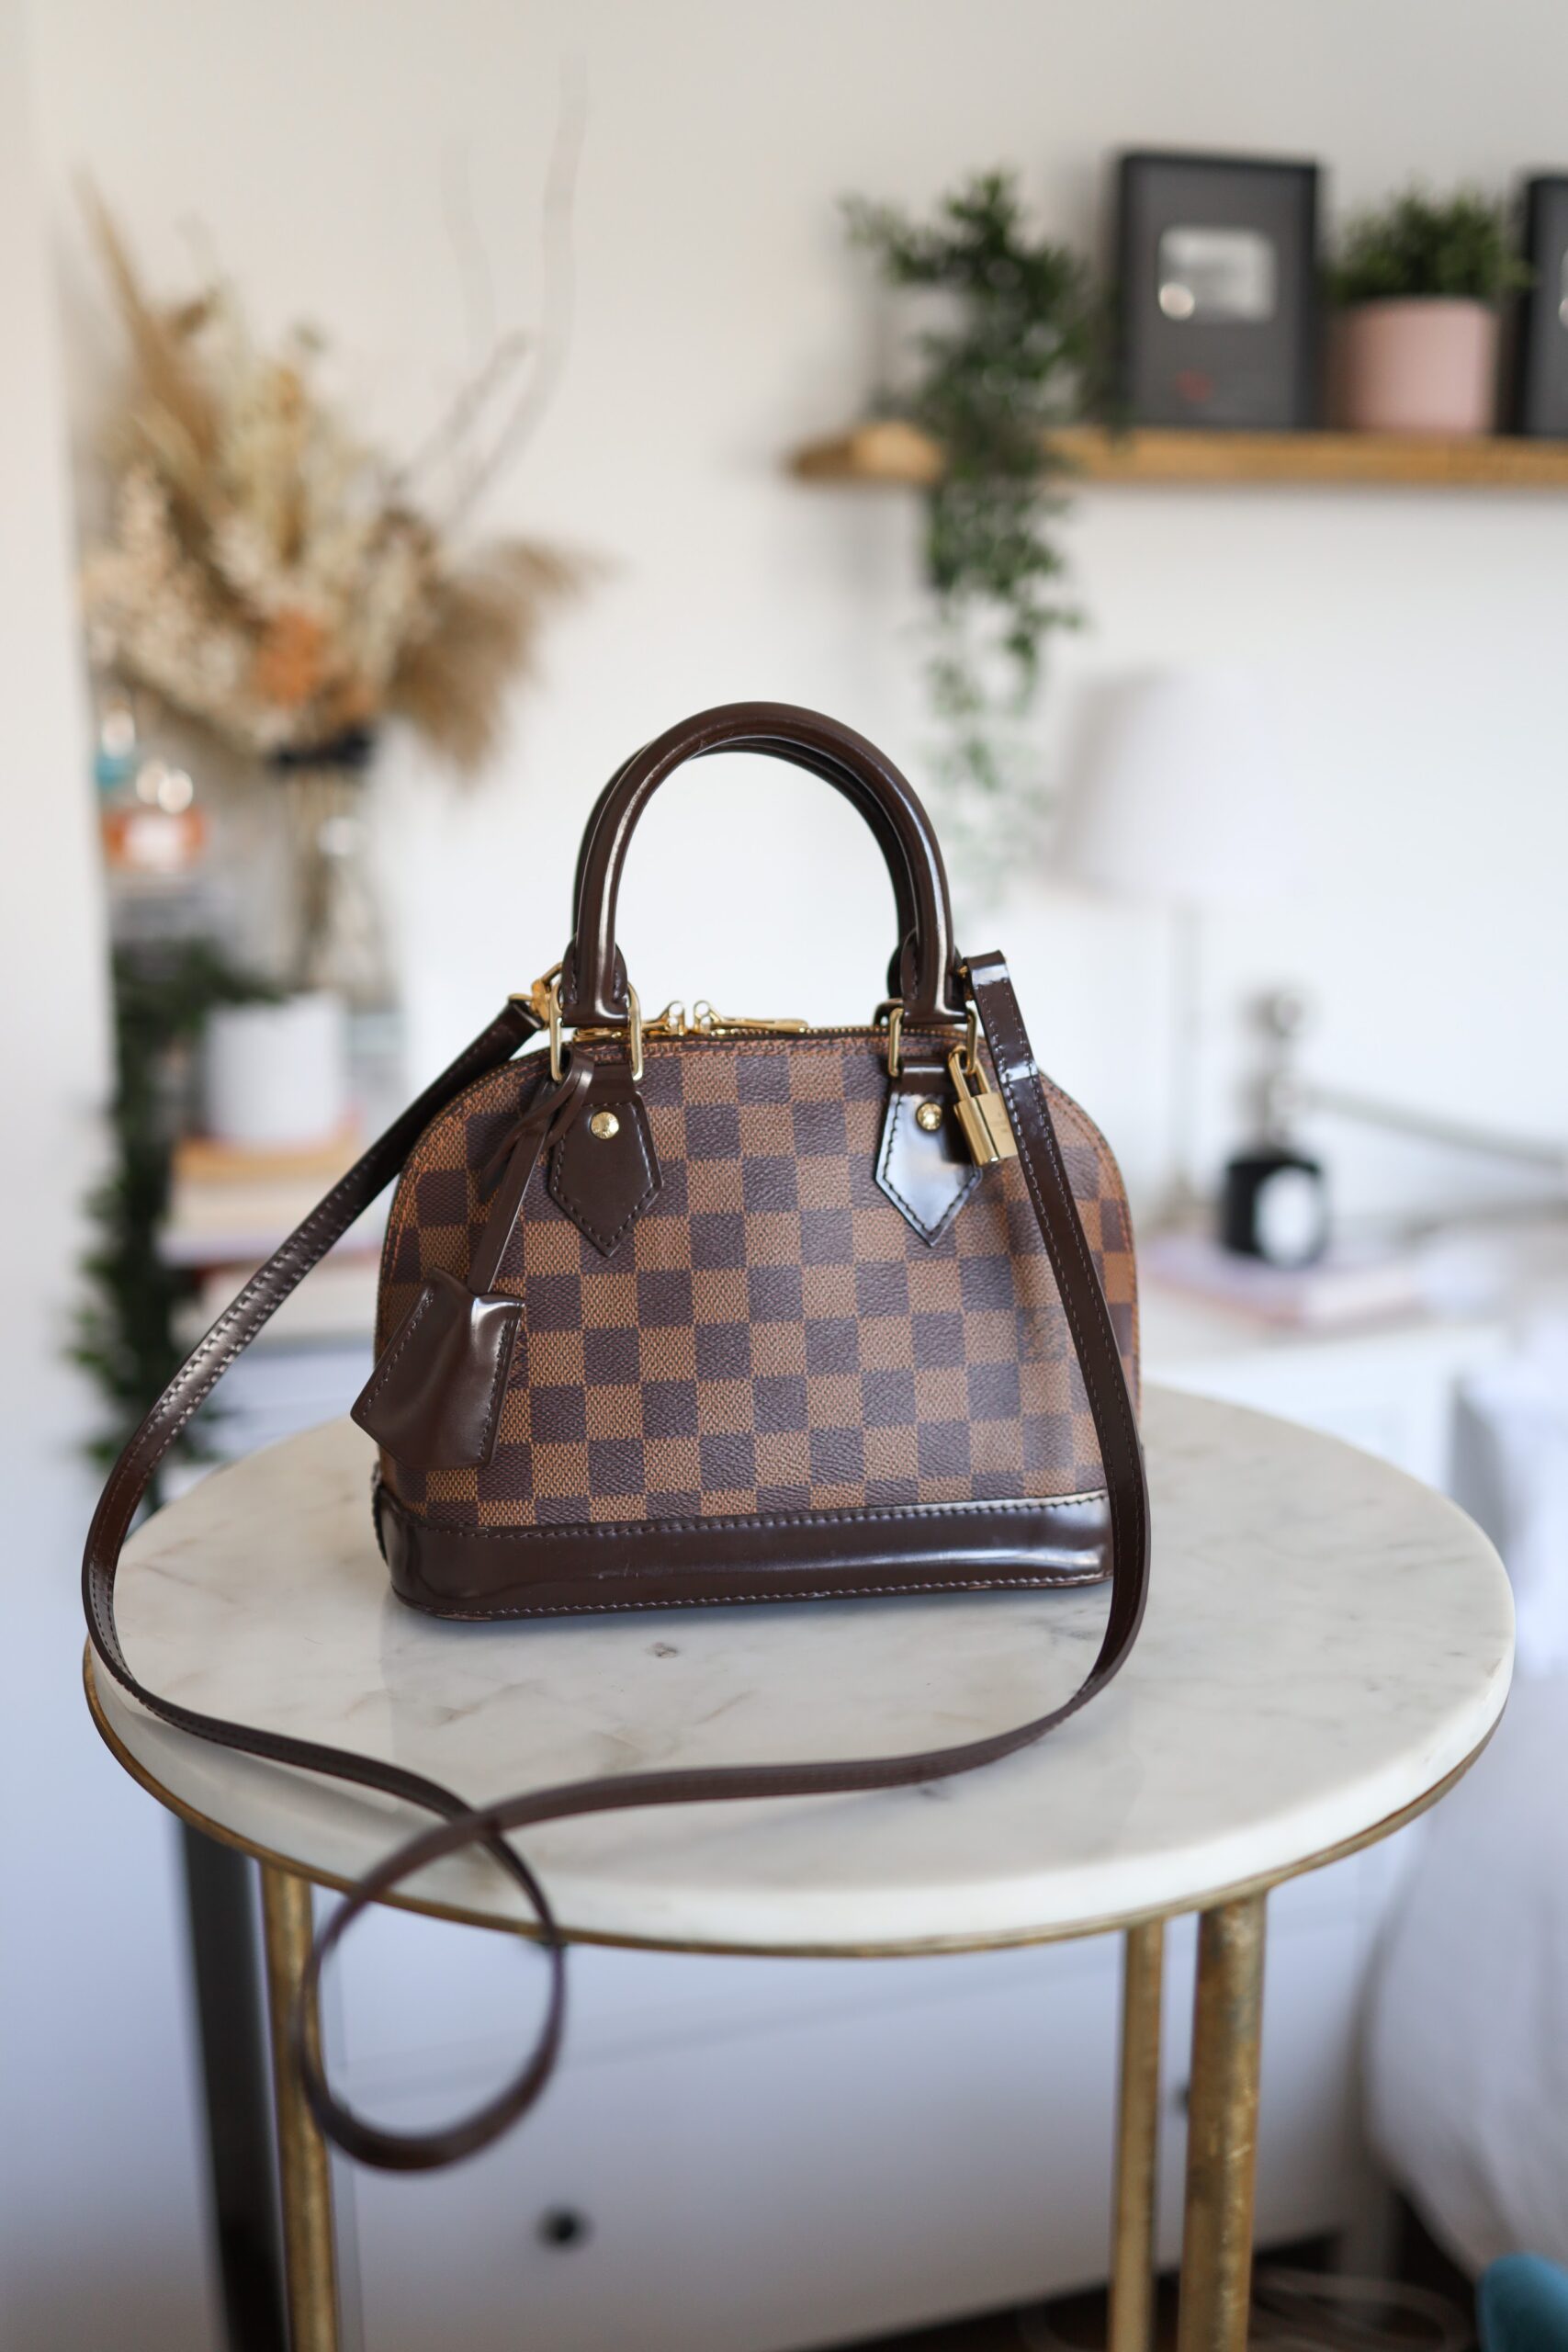 LOUIS VUITTON ALMA BB  What's In my Bag & Review 